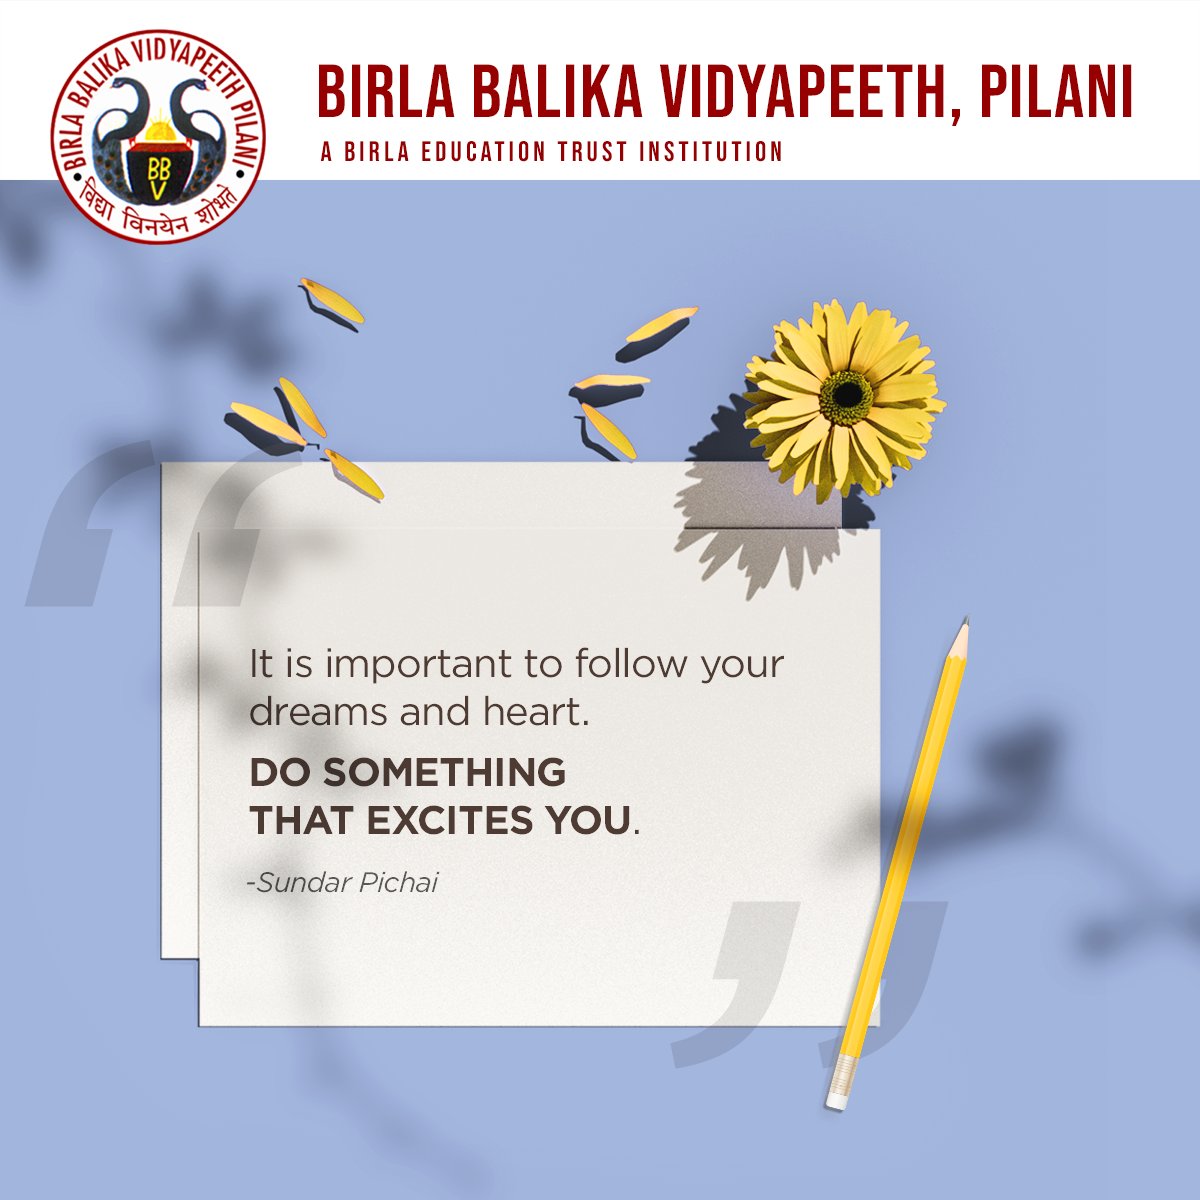 Never give up on you dream just because of the time it will take to accomplish, chase your dream because its only you who can make it happen.

#BBVPilani #BetPilani #BBVP #ThoughtForTheDay #MotivationQuote #InspirationForLife #QuotesForLife